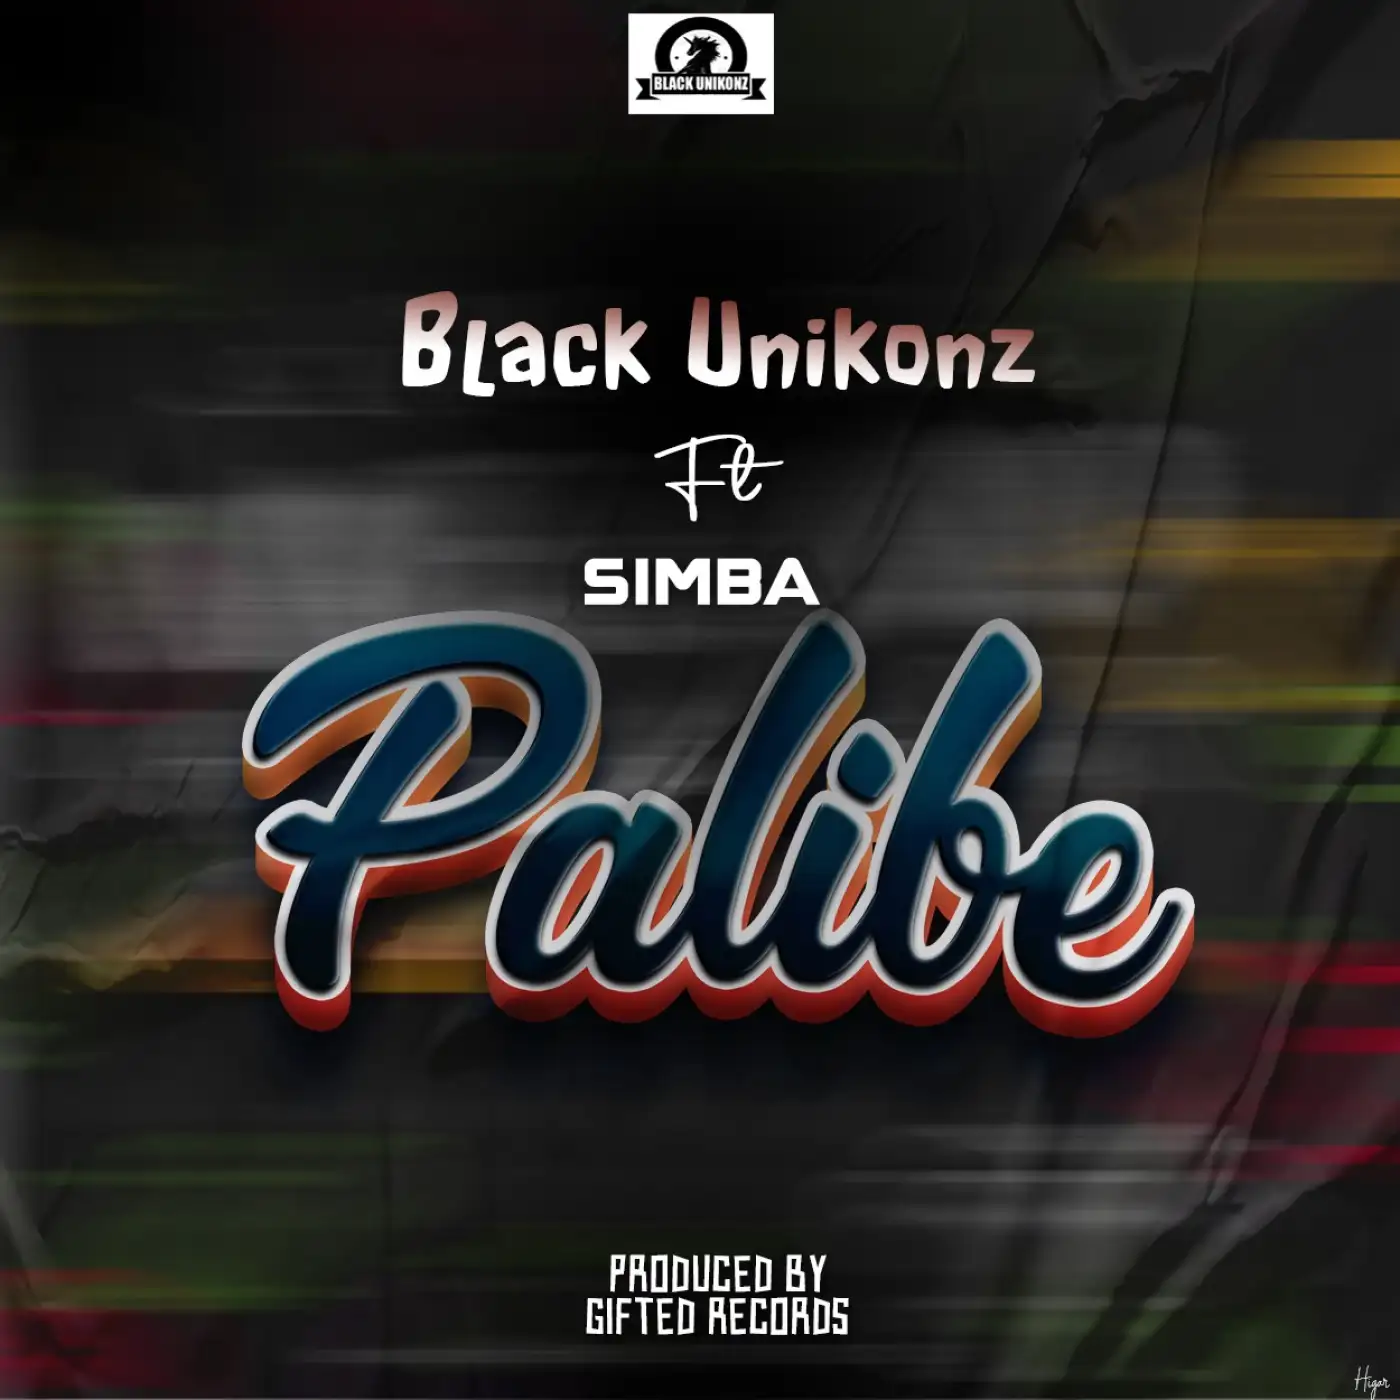 blackunikonz-palibe-ft-simba-prod-gifted-records-mp3-download-mp3 download